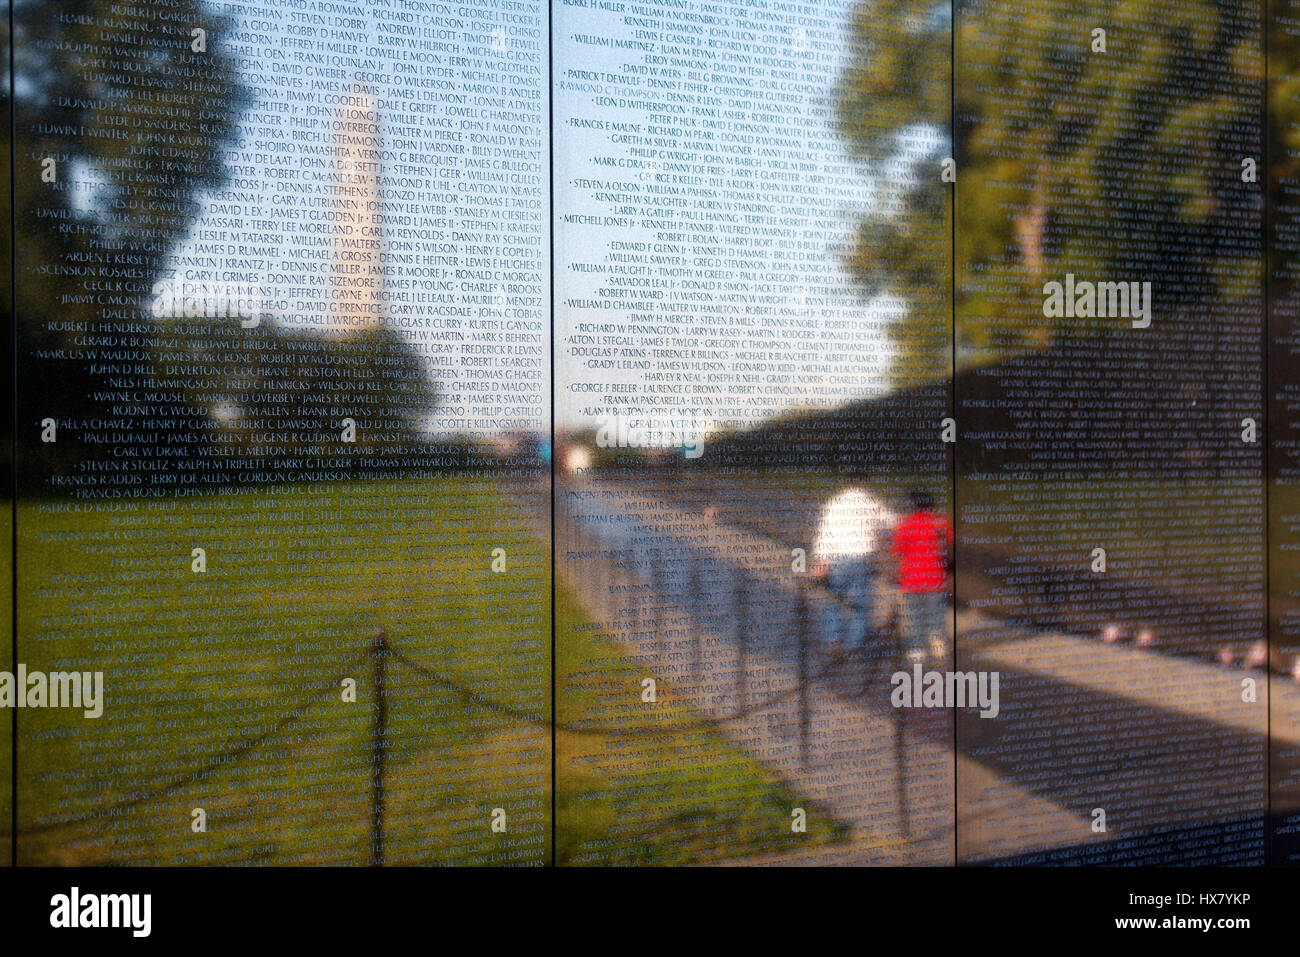 The Vietnam veterans war memorial wall in Washington DC, usa.the wall reflects a couple walking away and the Washington monument in the background Stock Photo